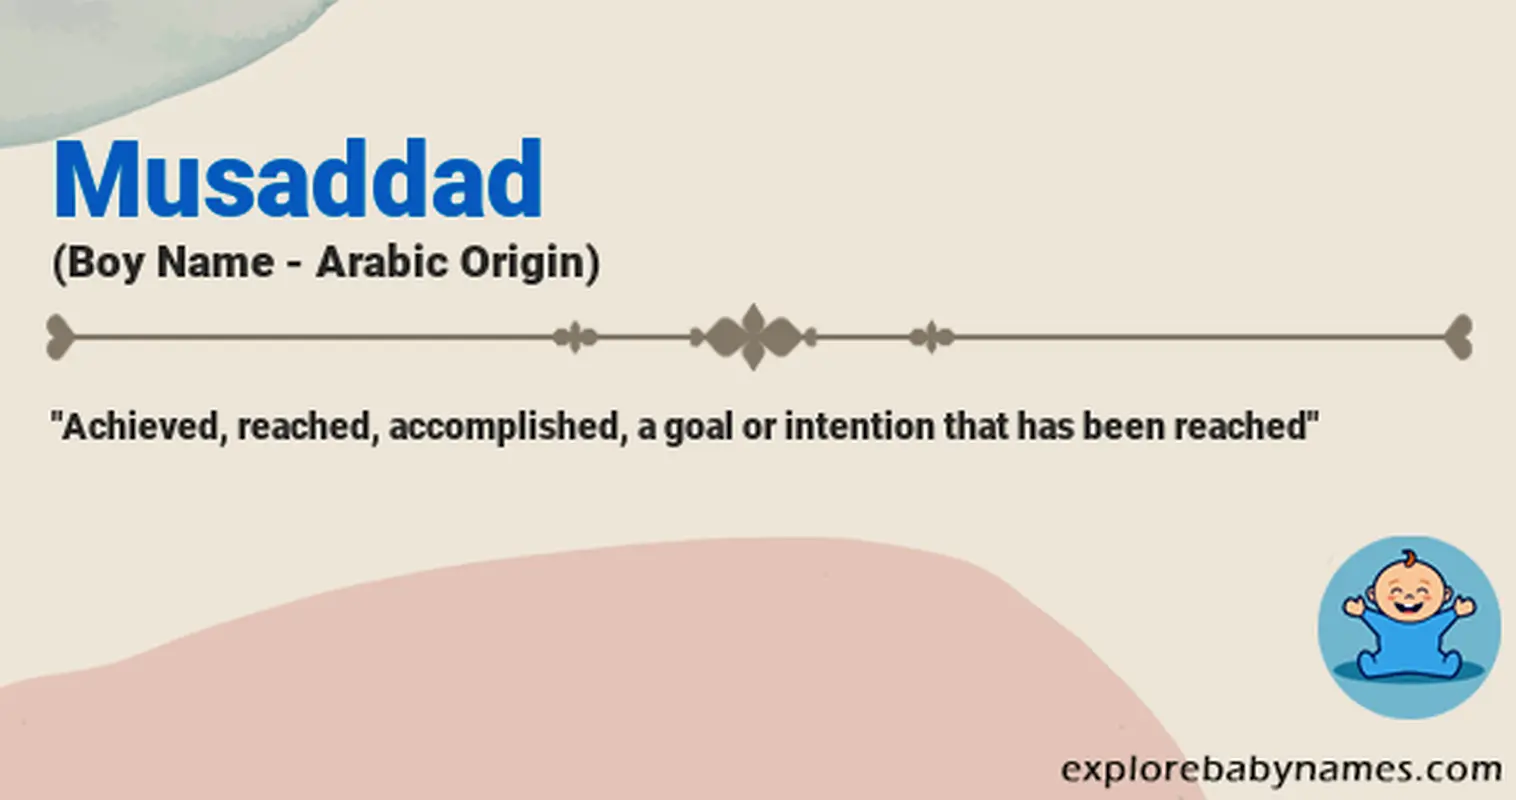 Meaning of Musaddad